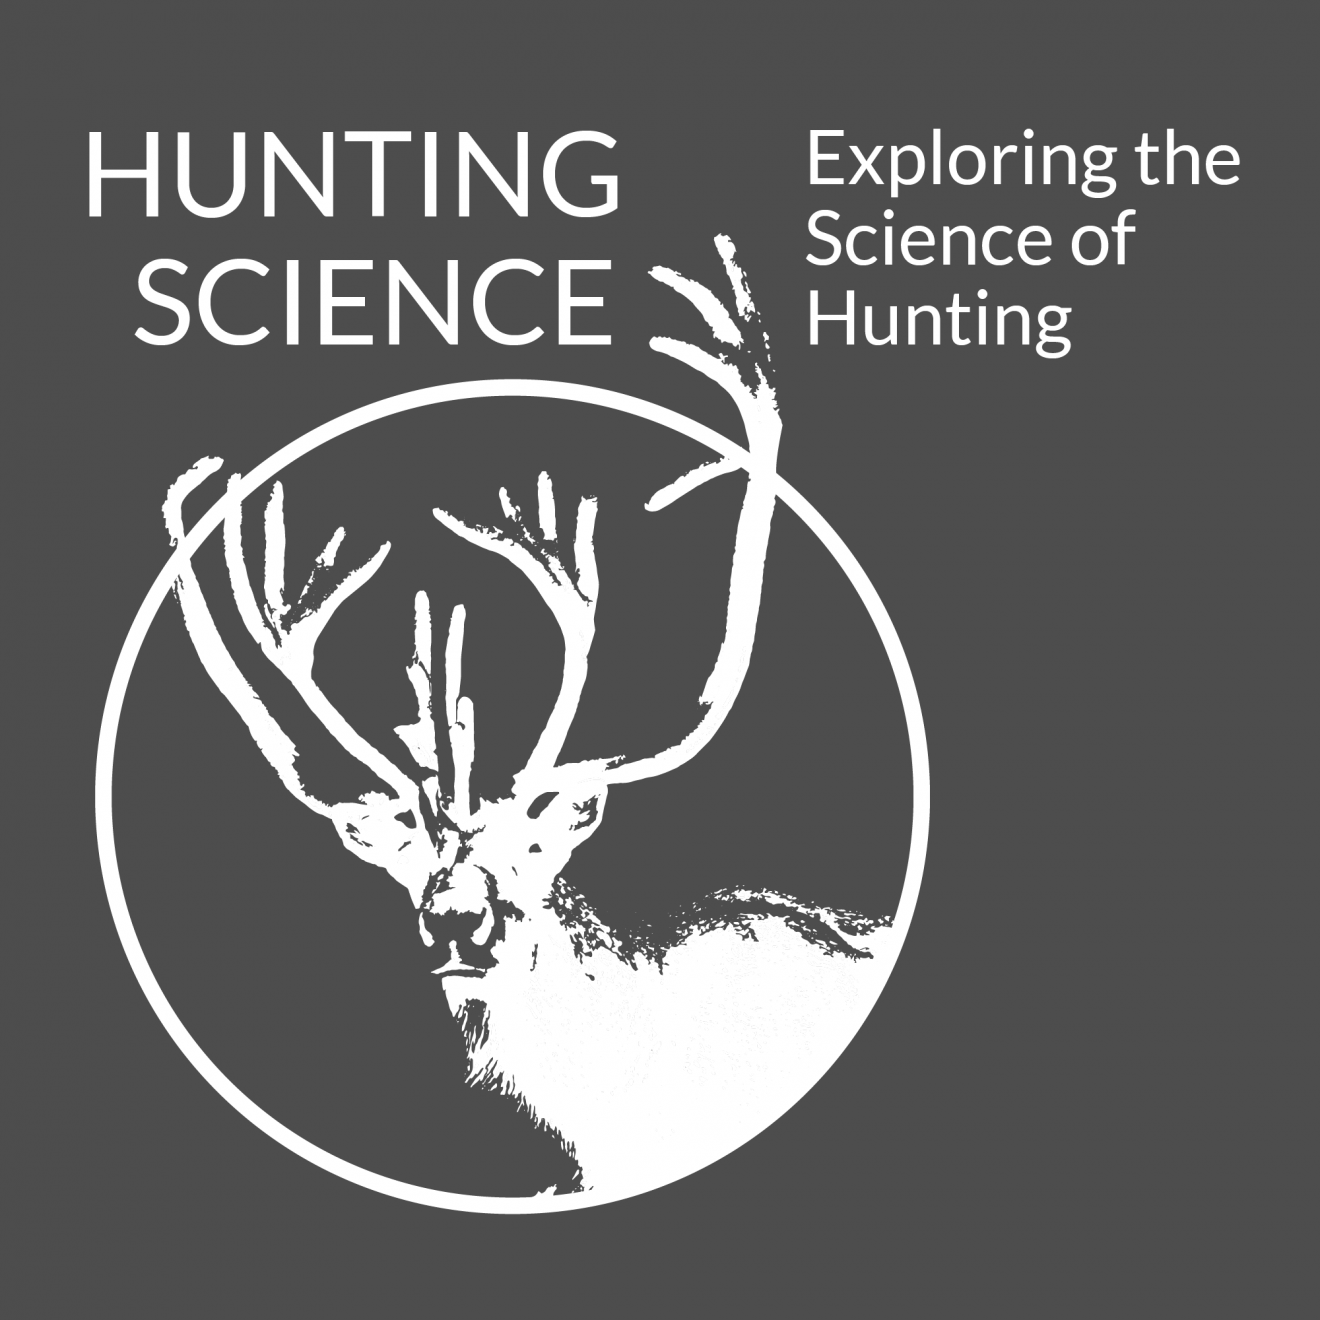 Hunting Science logo with an elk silhouette.